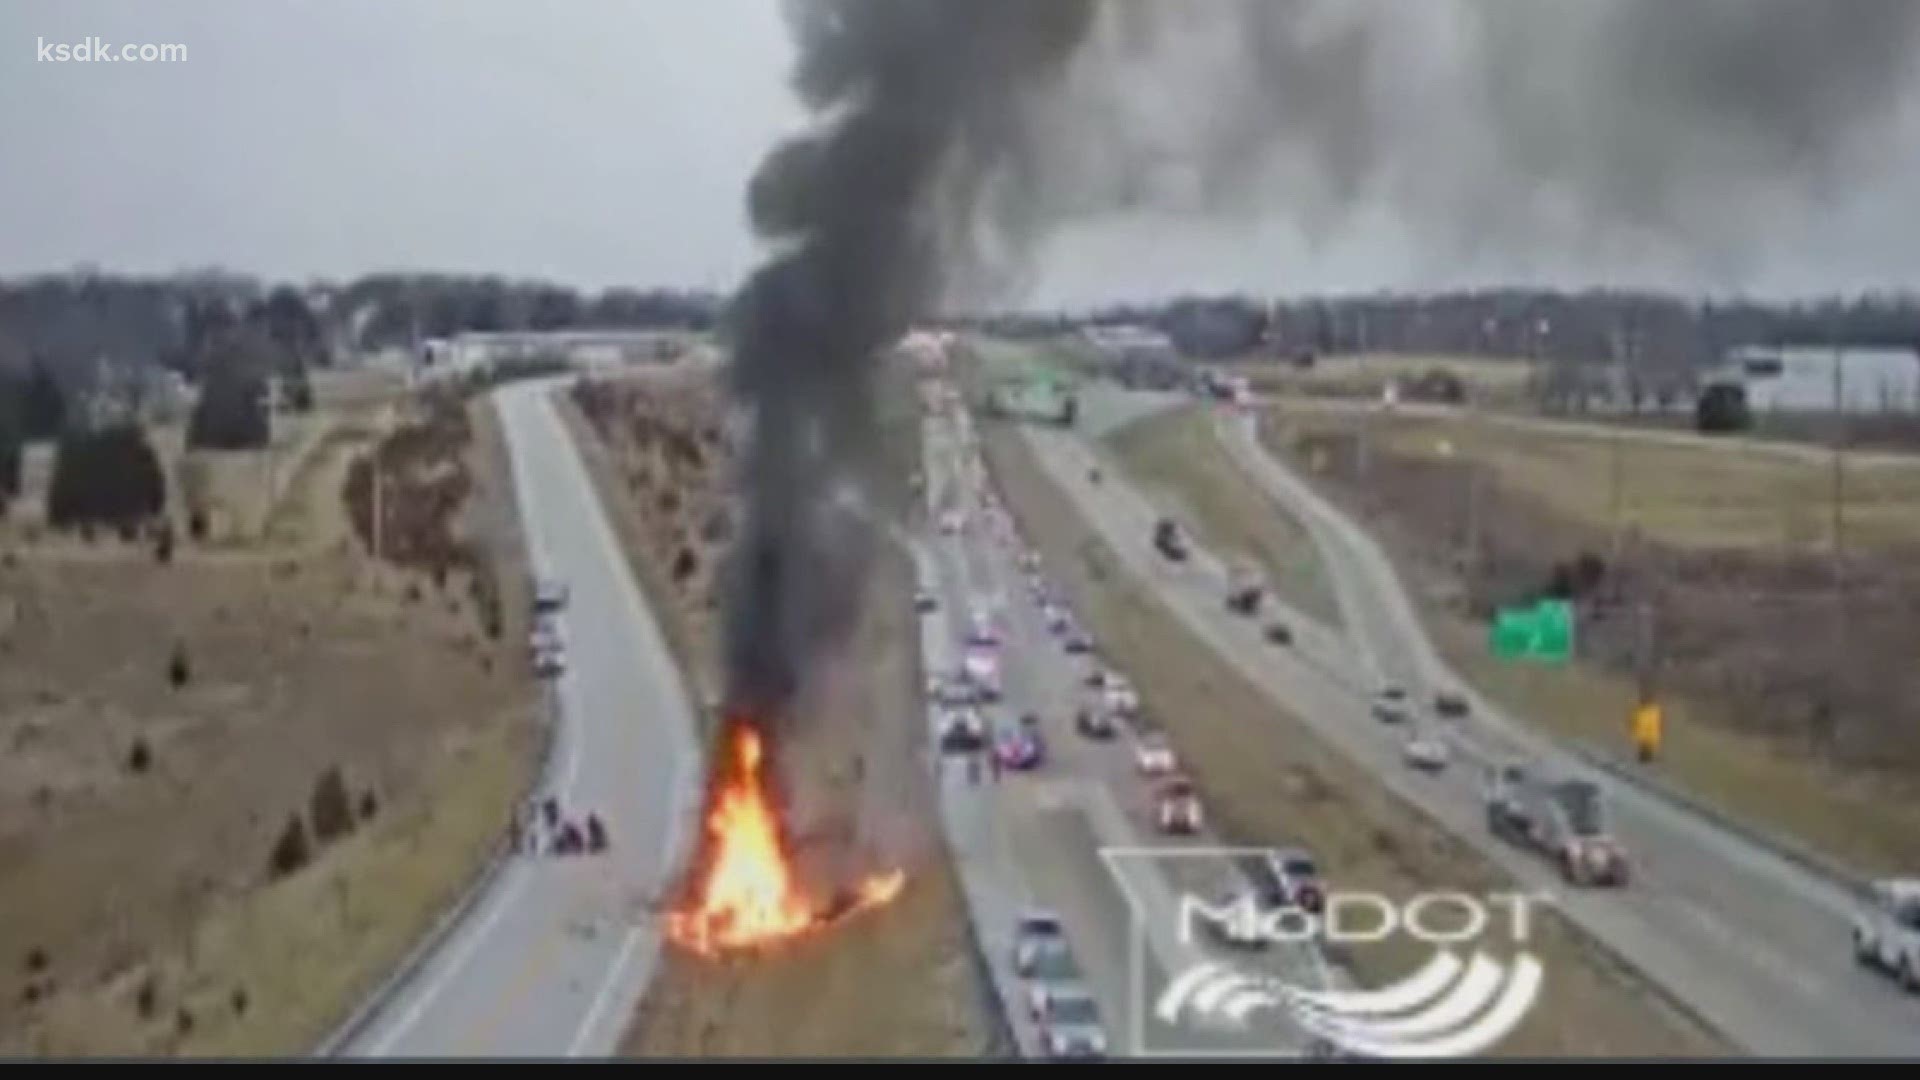 Traffic cameras from MoDOT showed large flames coming out of the vehicle, which came to a stop in a grassy median between the interstate and outer road